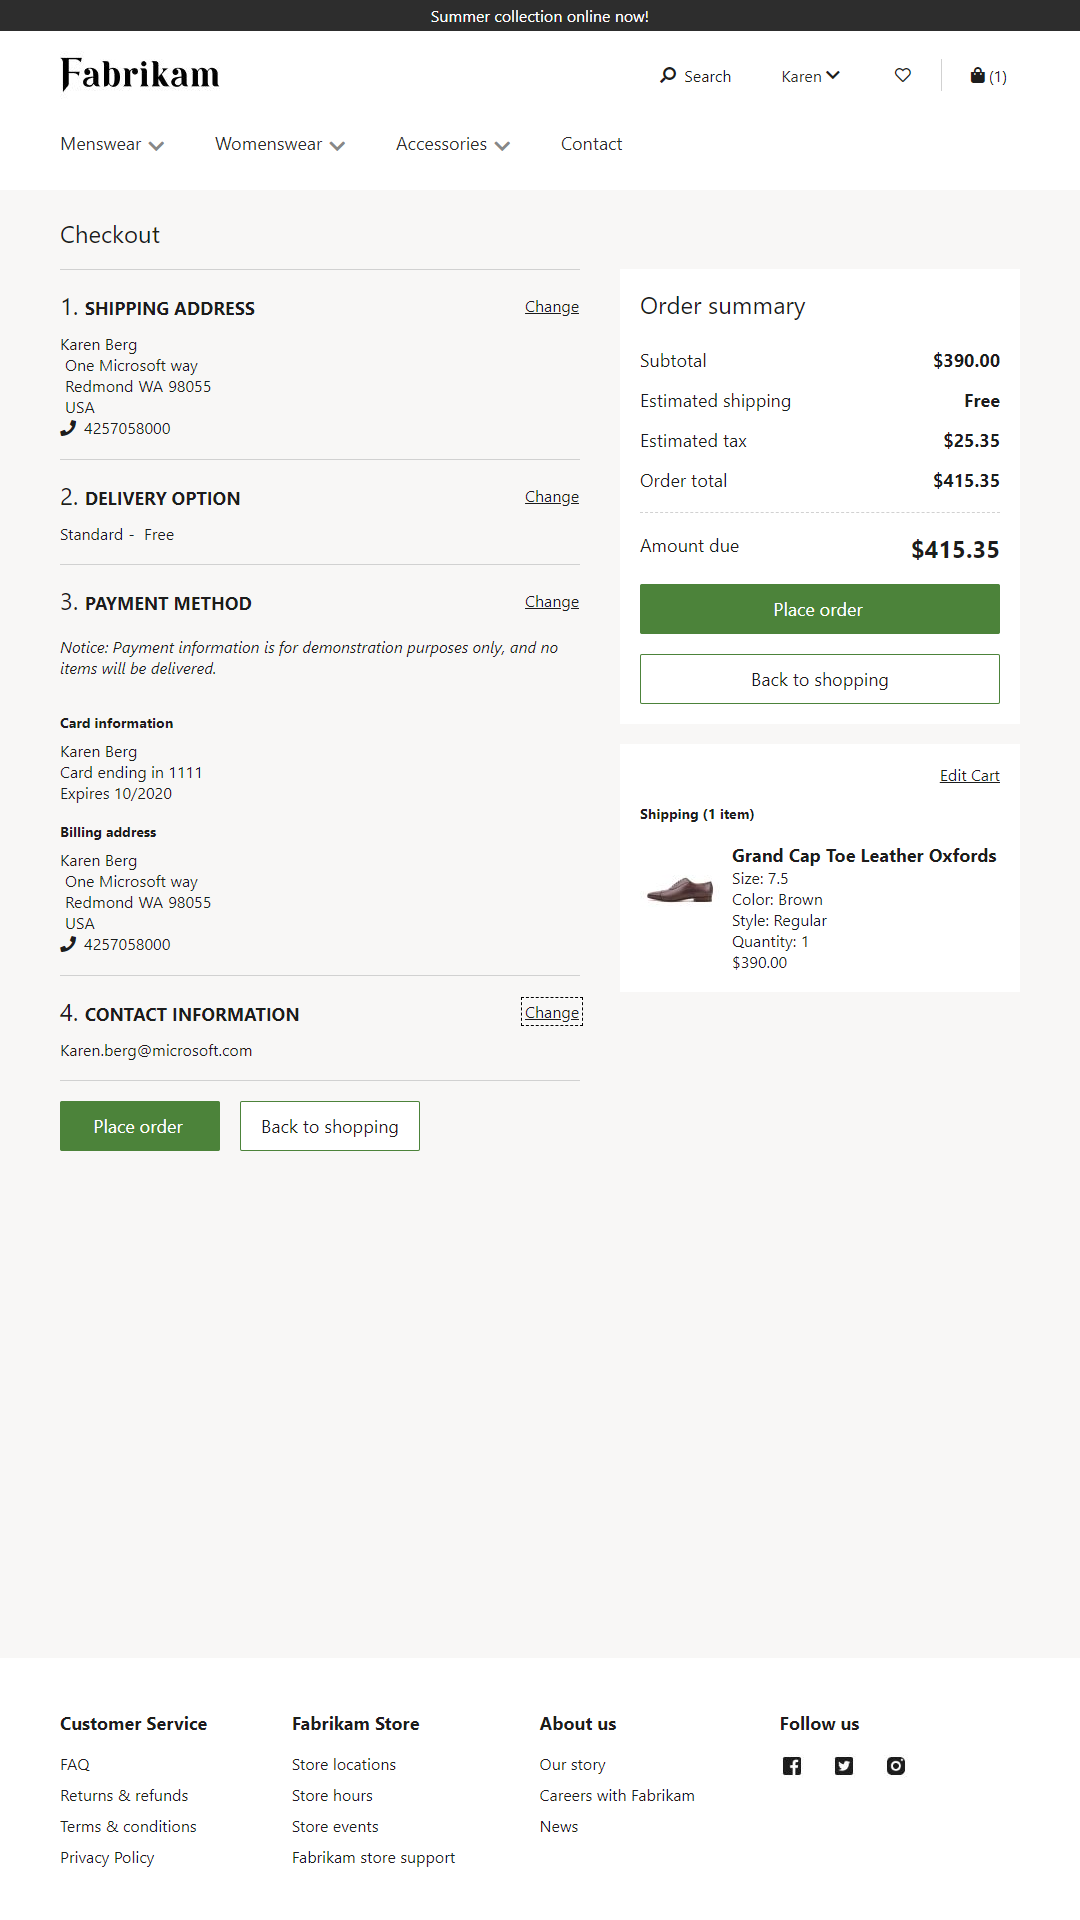 Example of a checkout page.